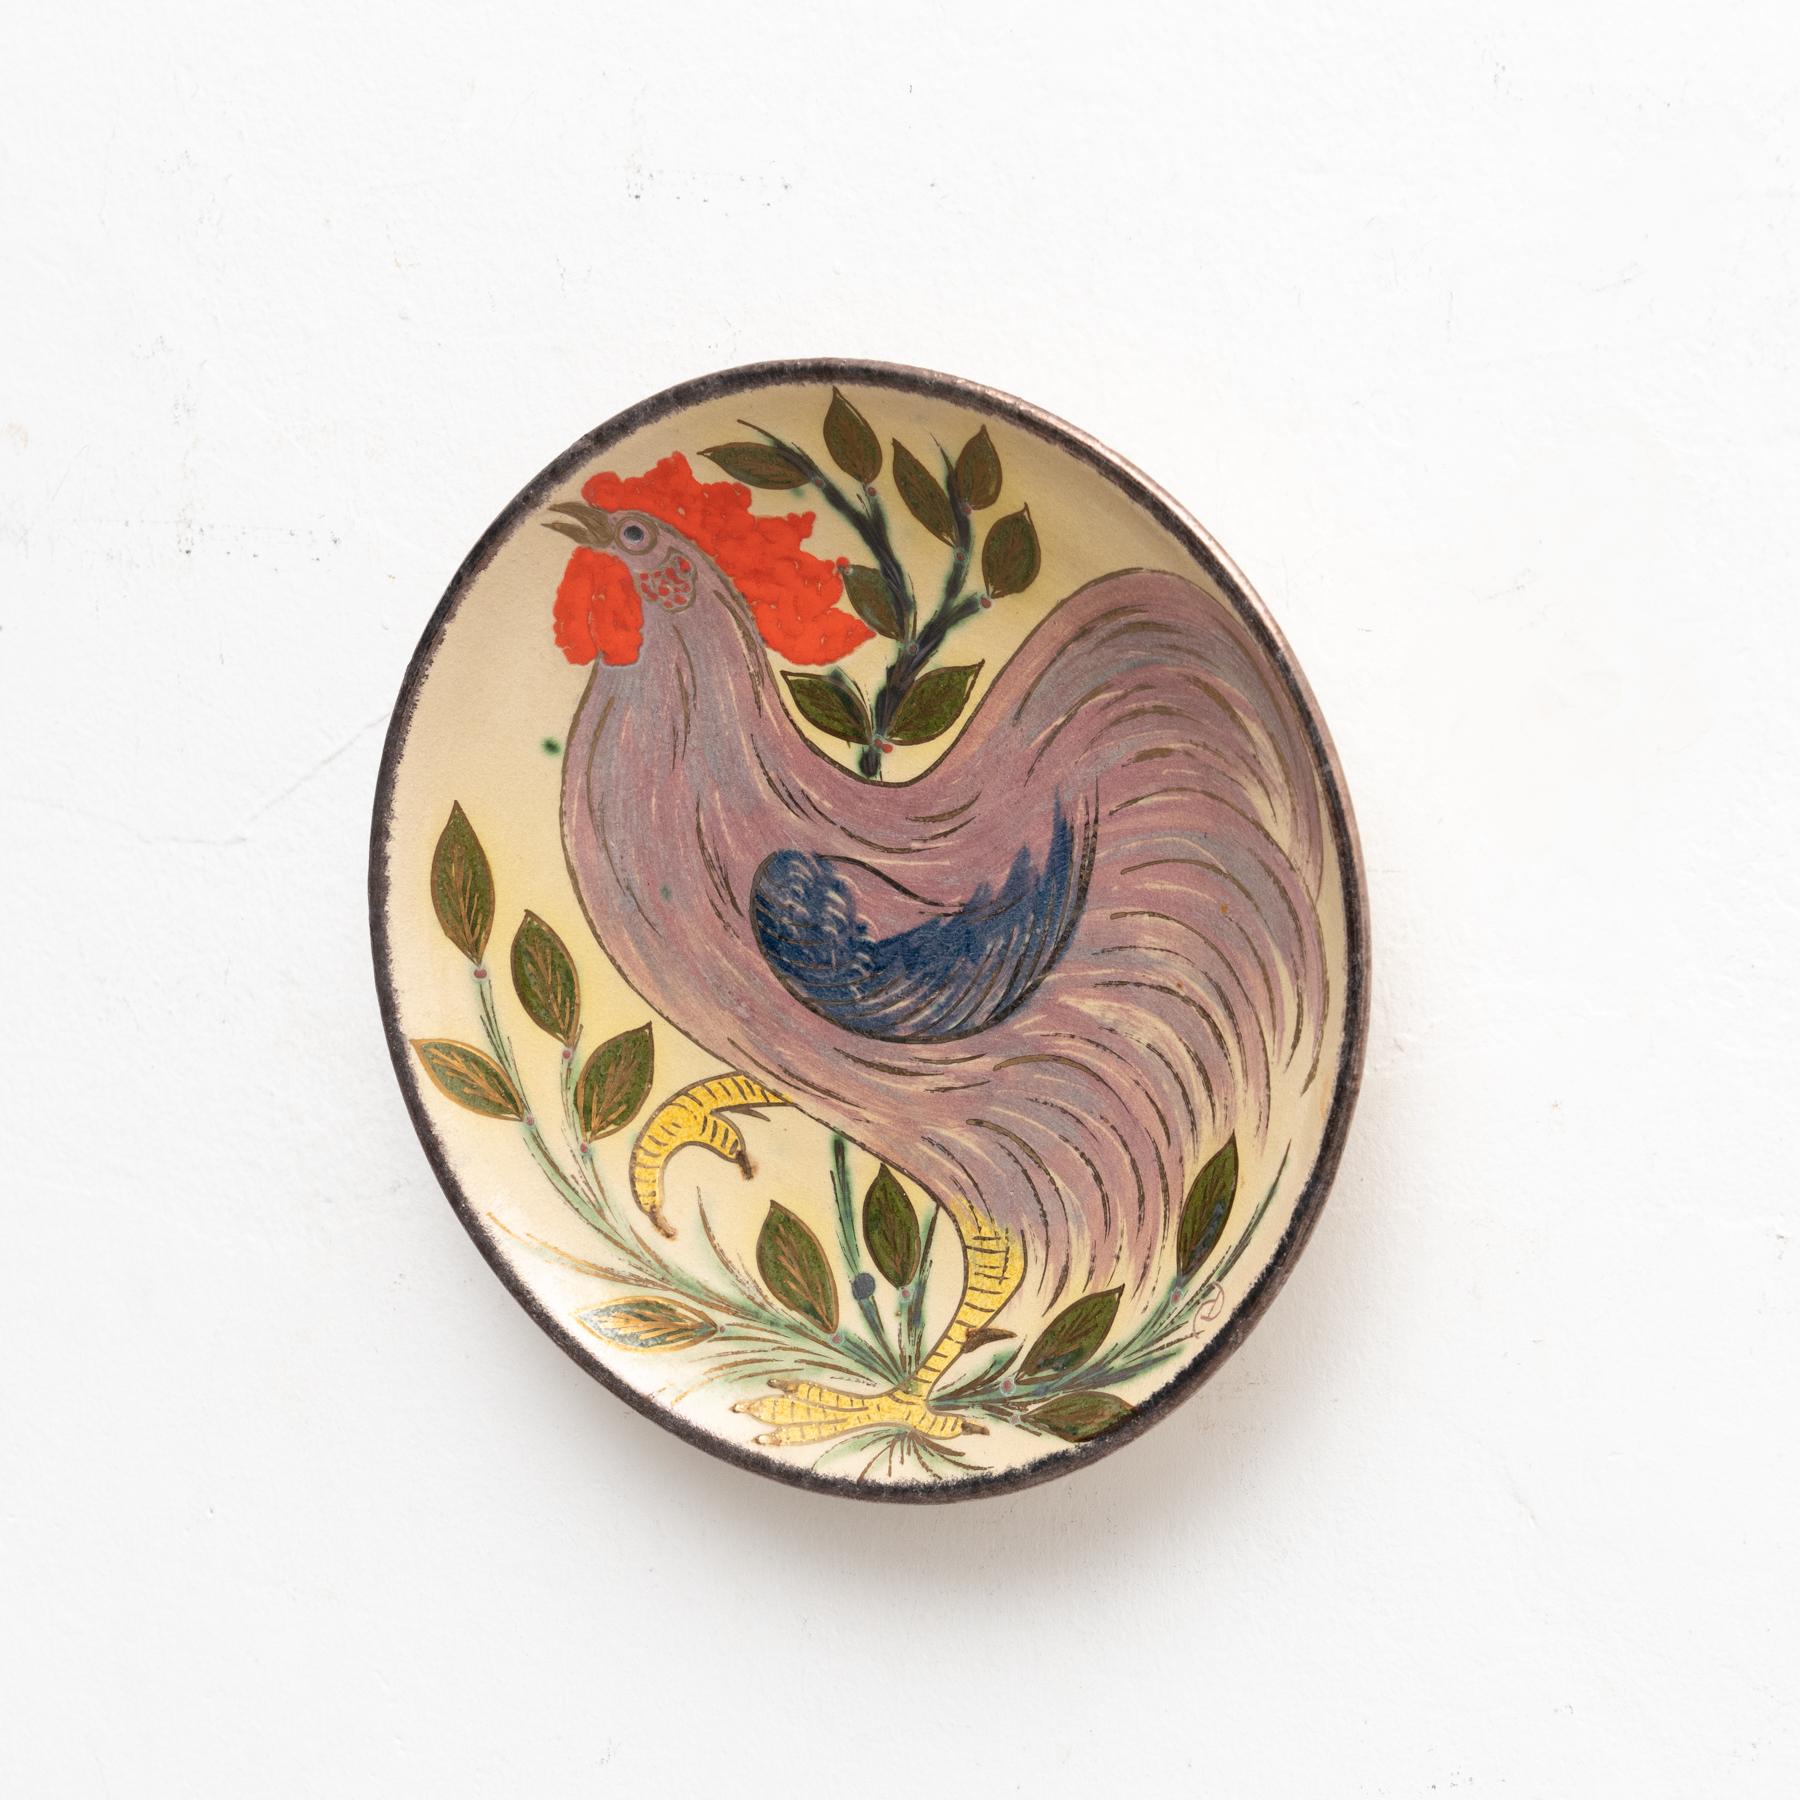 Spanish Ceramic Traditional Hand Painted Plate by Catalan Artist Diaz Costa, circa 1960 For Sale